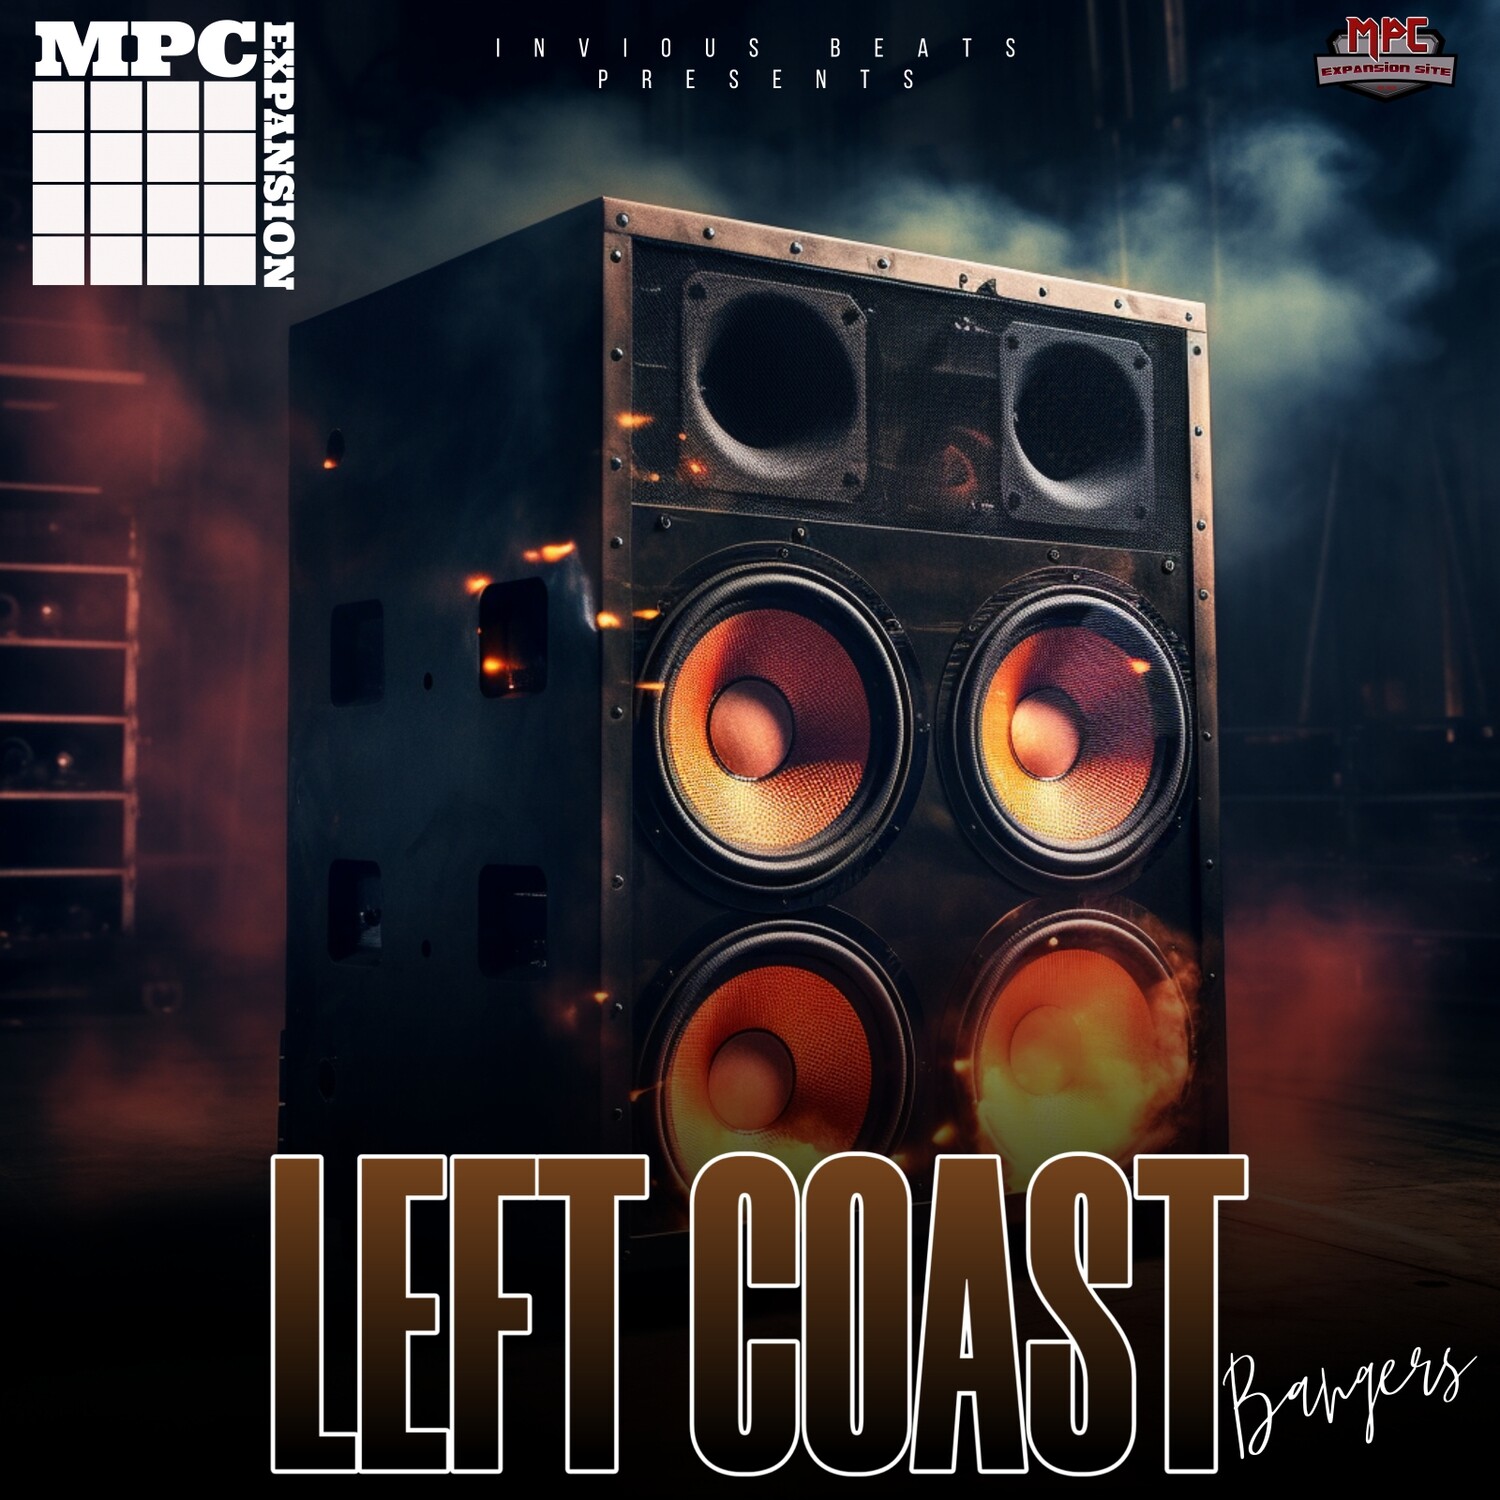 MPC EXPANSION 'LEFT COAST BANGERS' by INVIOUS